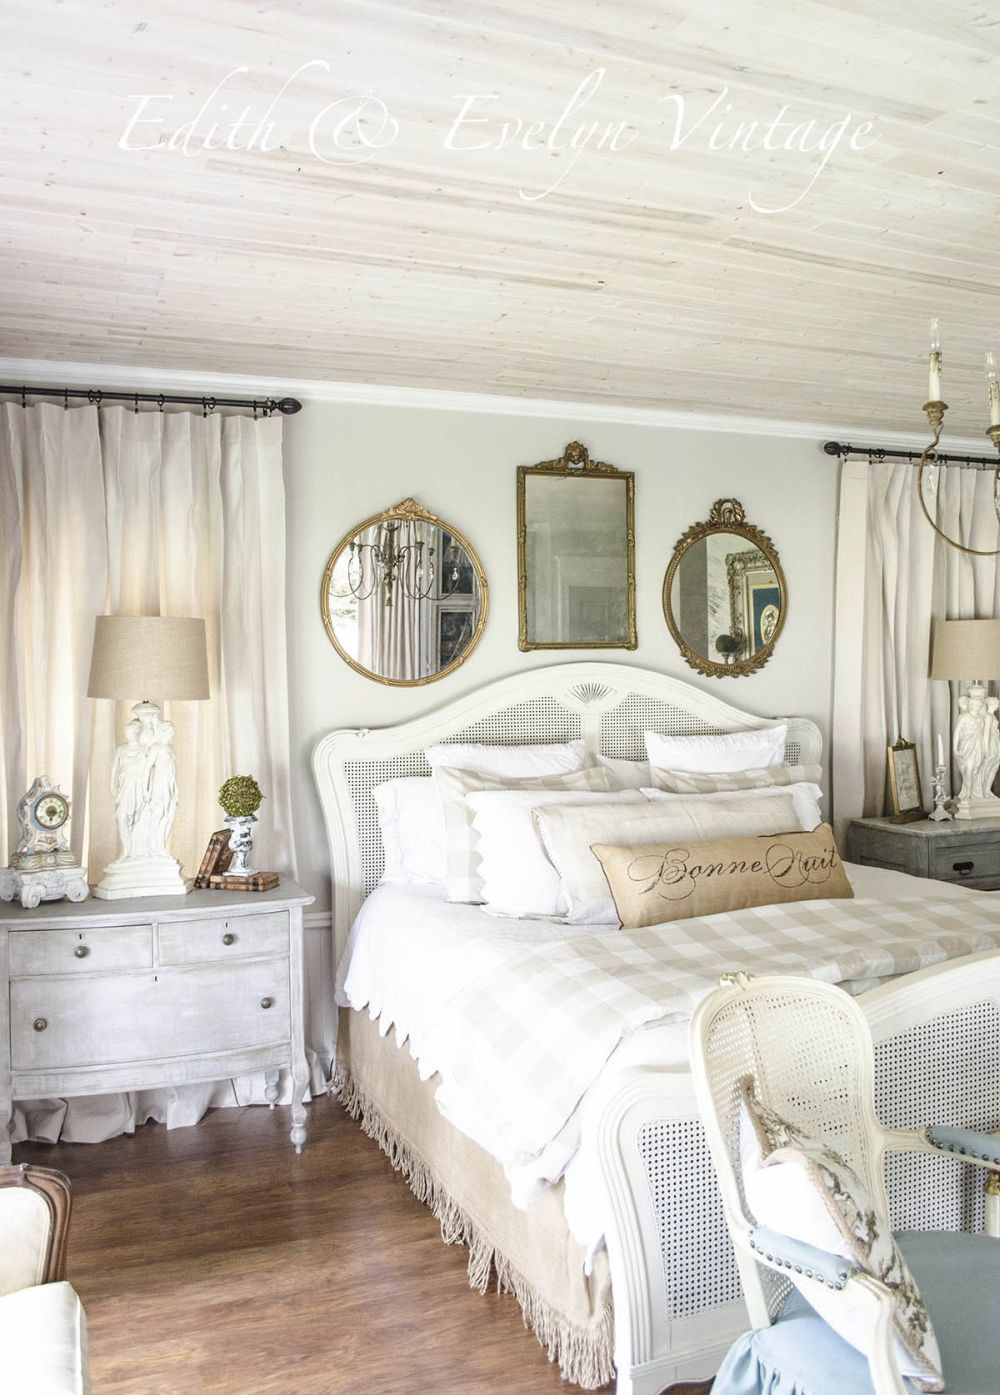 French Bedroom Decor
 10 Tips for Creating The Most Relaxing French Country